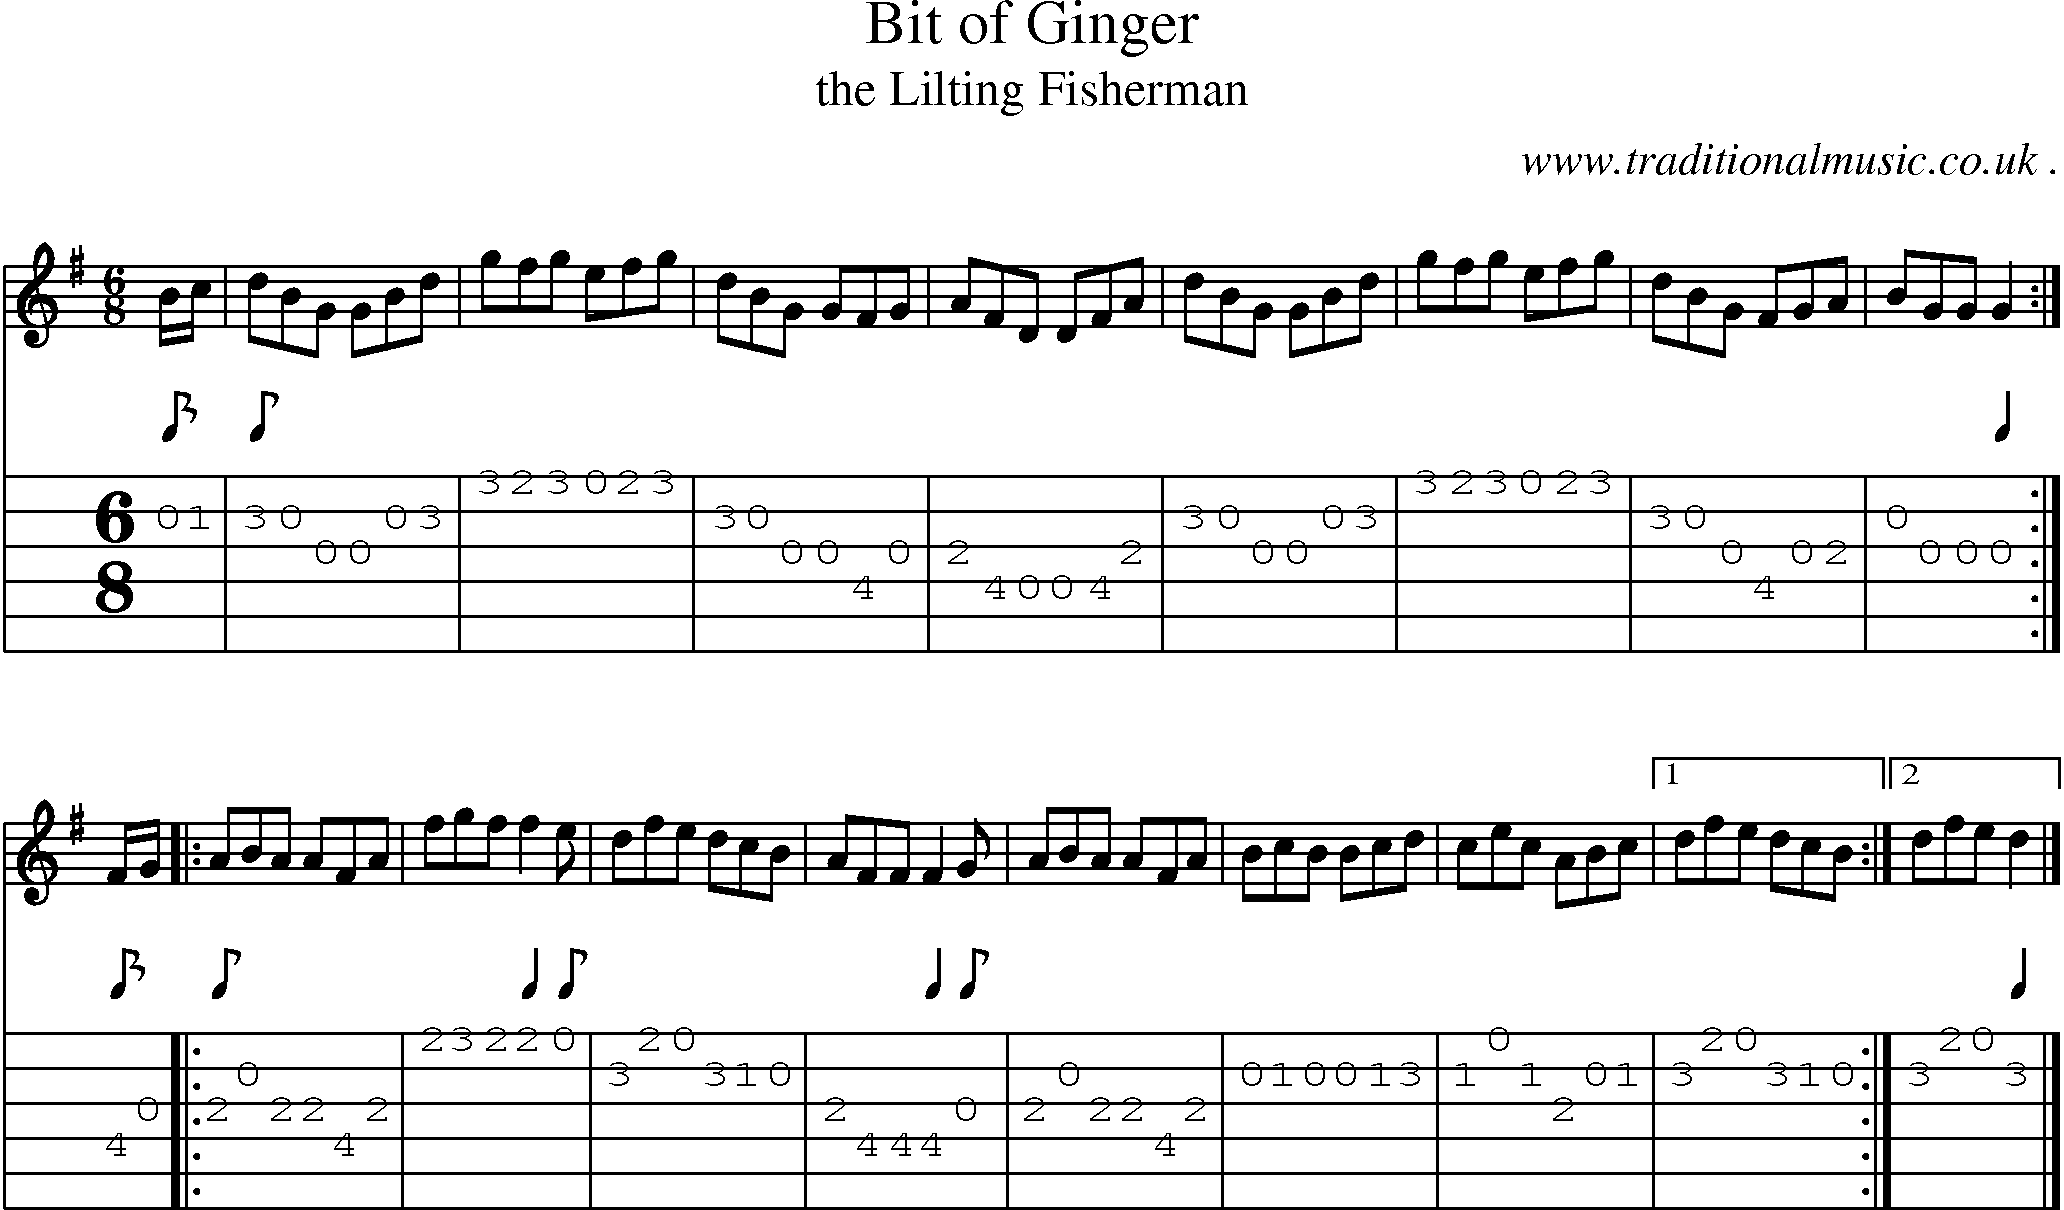 Sheet-music  score, Chords and Guitar Tabs for Bit Of Ginger